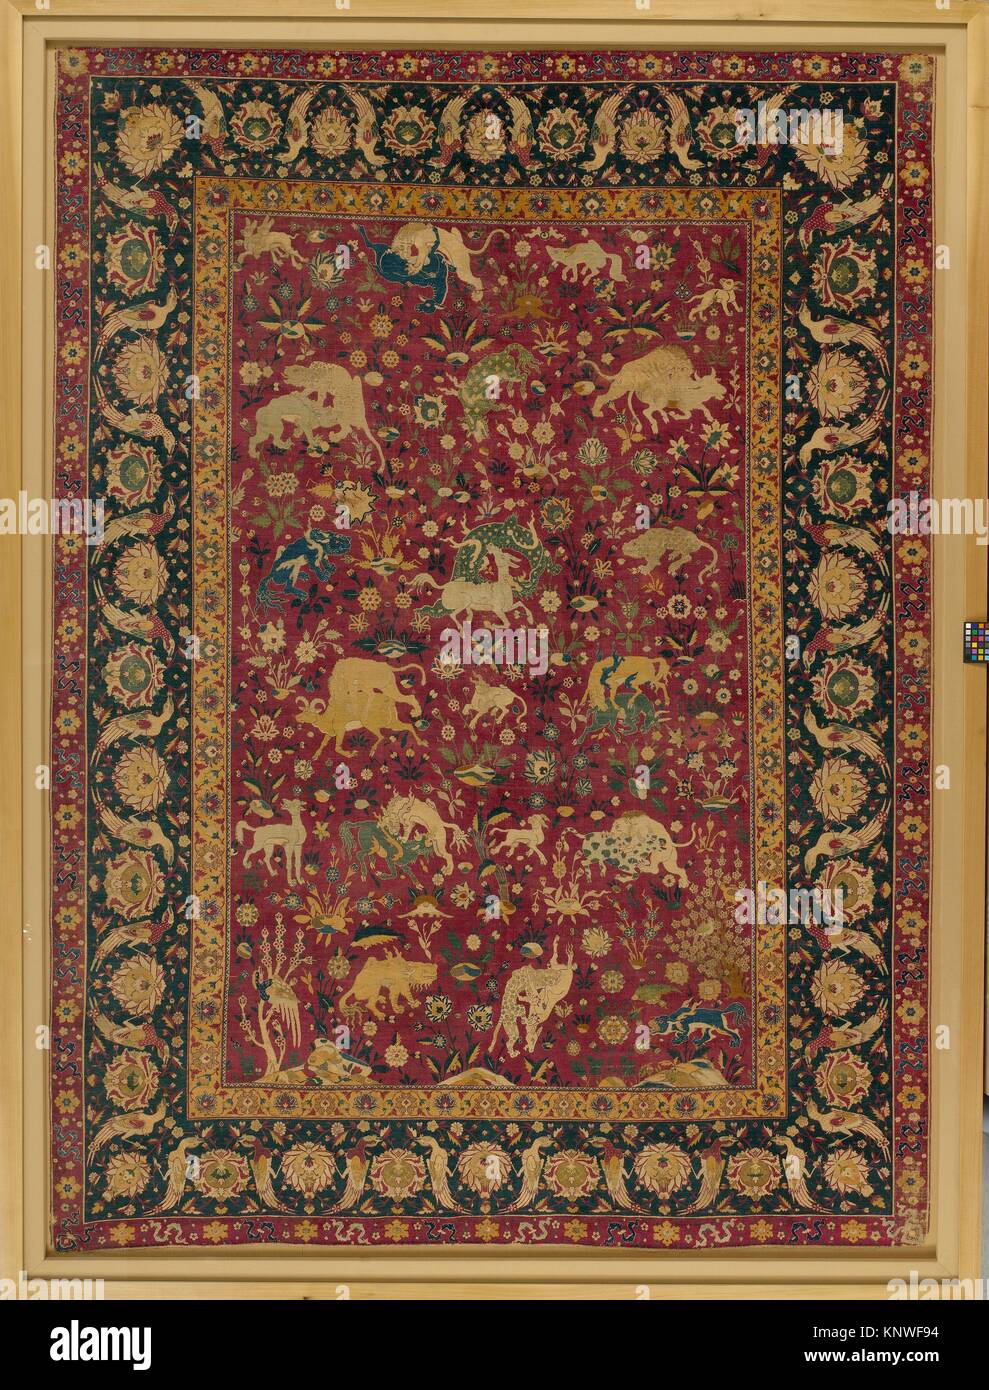 Silk Animal Carpet. Object Name: Carpet; Date: second half 16th century; Geography: Made in Iran, probably Kashan; Medium: Silk (warp, weft, and Stock Photo